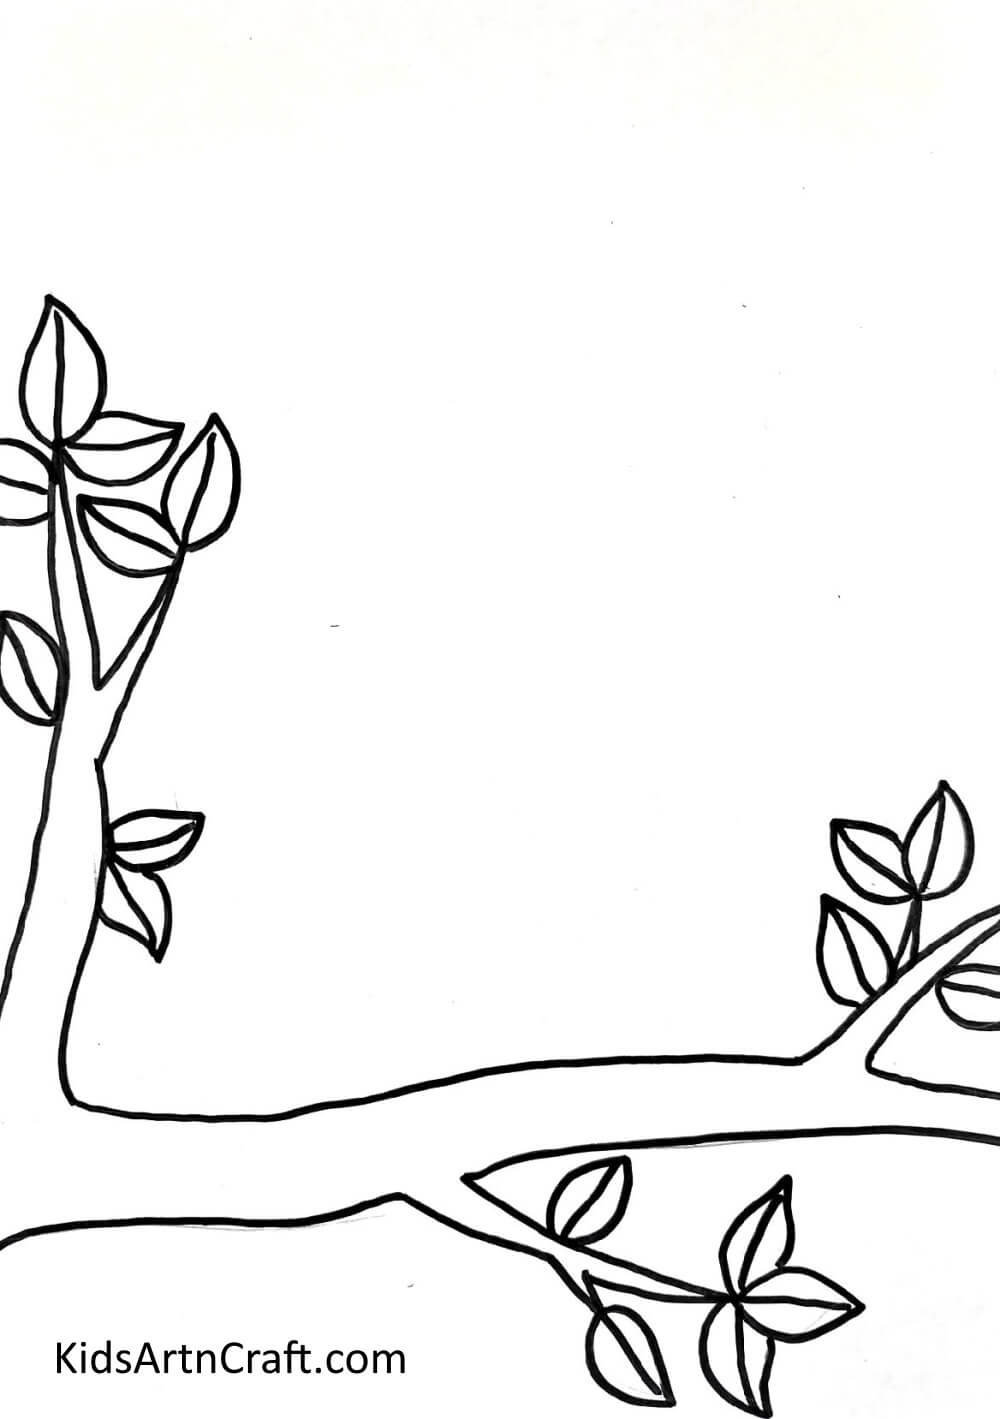 Drawing A Tree Branch Creating a Vibrant Bird Display on a Tree Limb - Simple Sketching